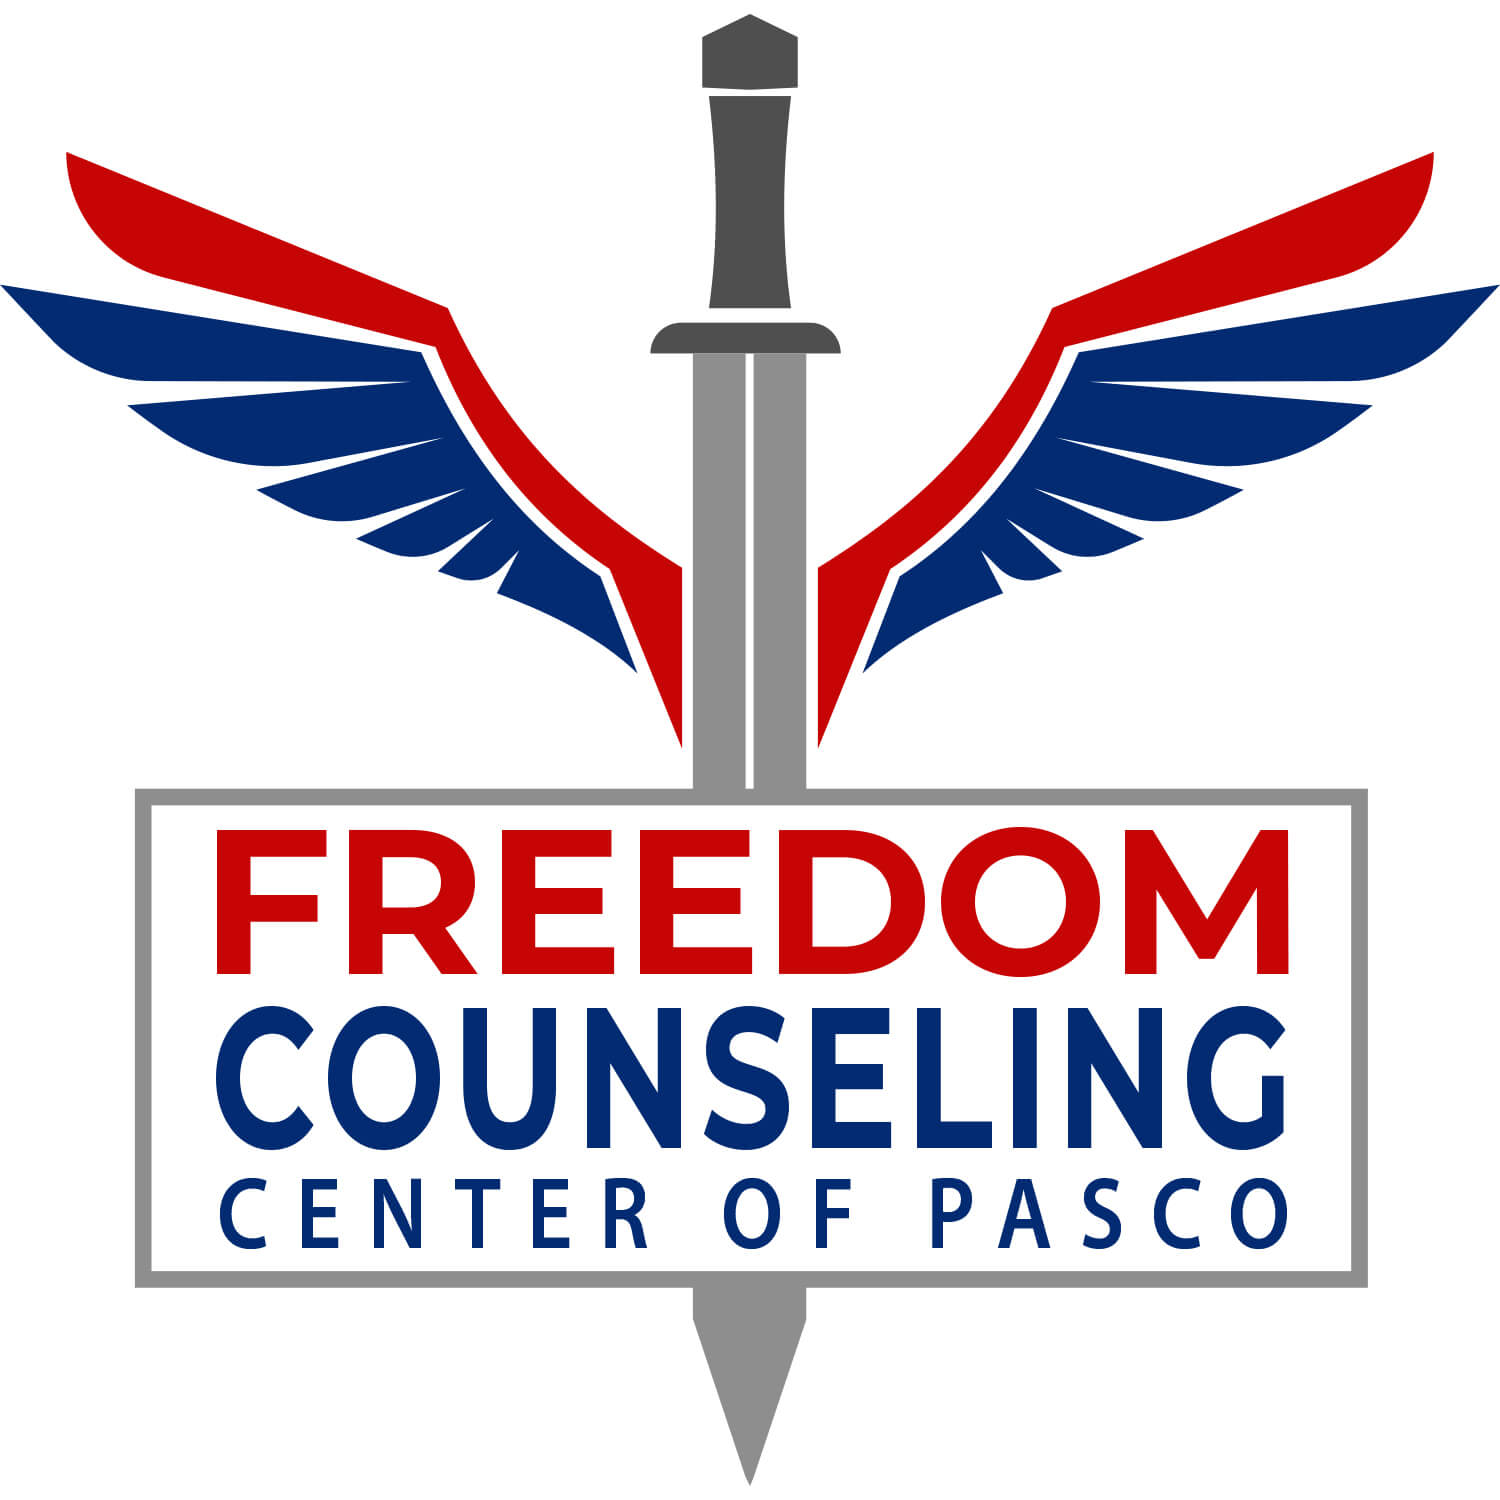 Freedom Counseling Center Of Pasco Logo